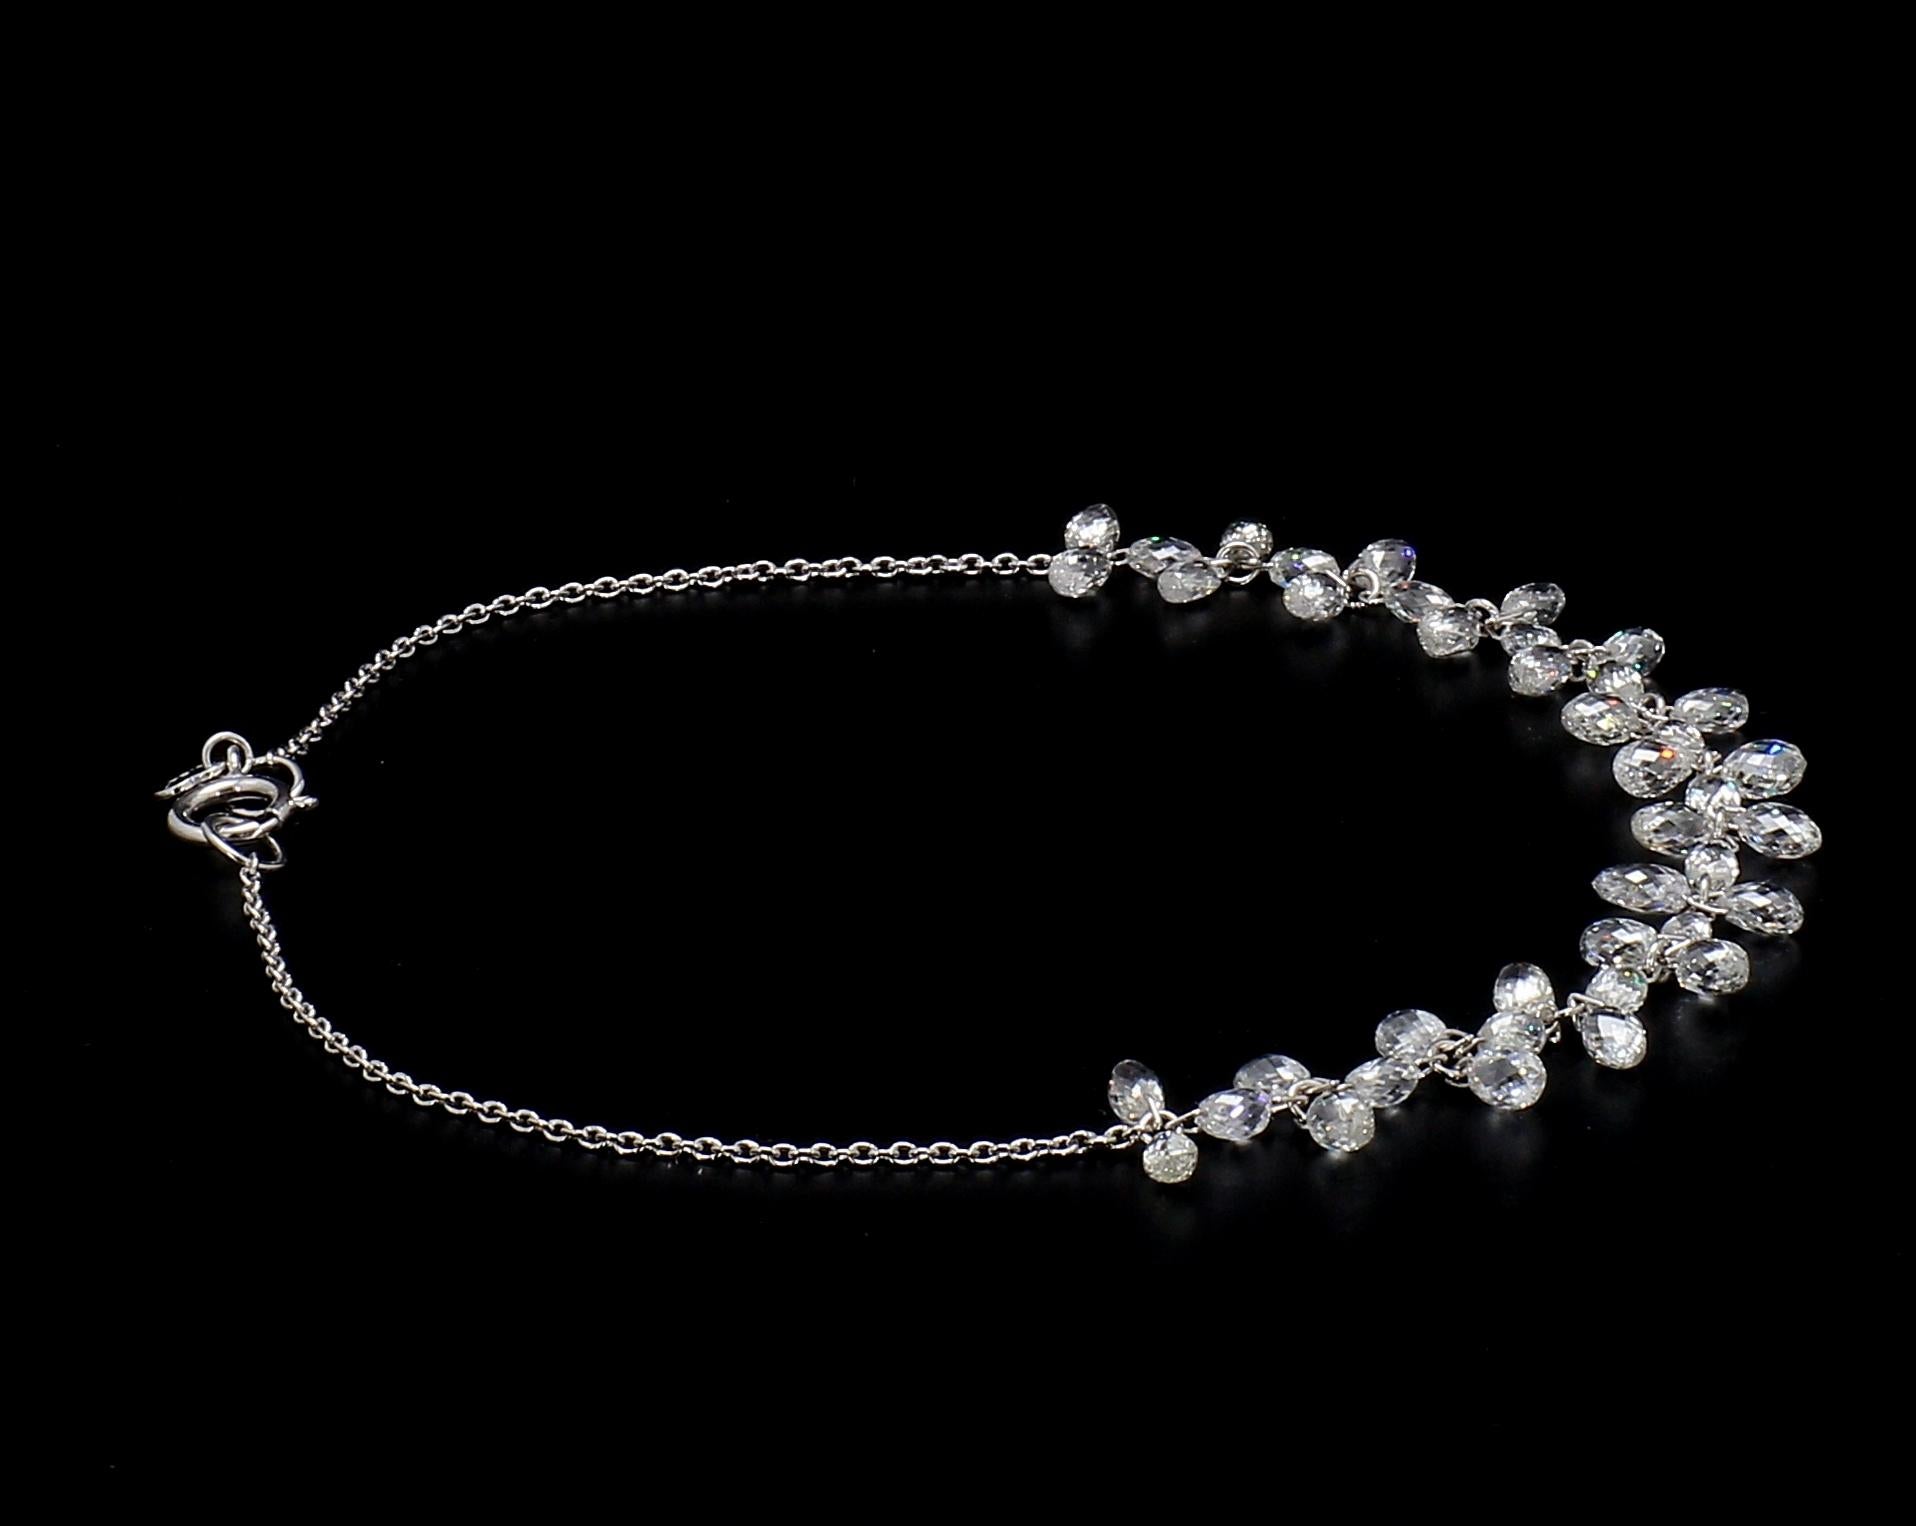 Panim 4.64 Carats 18k White Gold Diamond Briolette Floral Bracelet In New Condition For Sale In Tsim Sha Tsui, Hong Kong